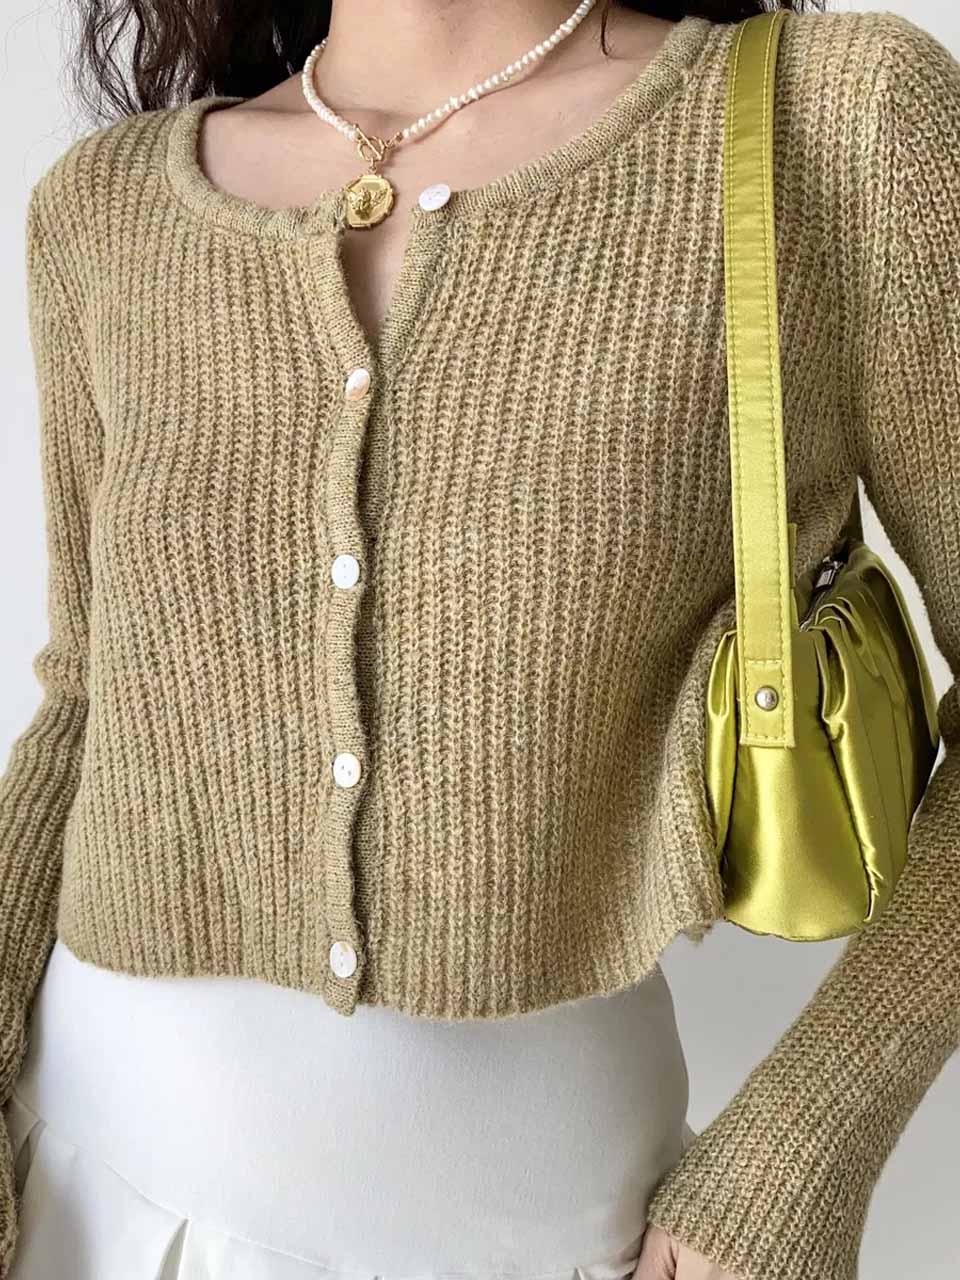 Thanksgiving Day Gifts Autumn Women Cardigans Sweater Casual Vintage Knitted Sweaters Fashion Korean Long Sleeve Knitwear Female Solid V-Neck Outwear